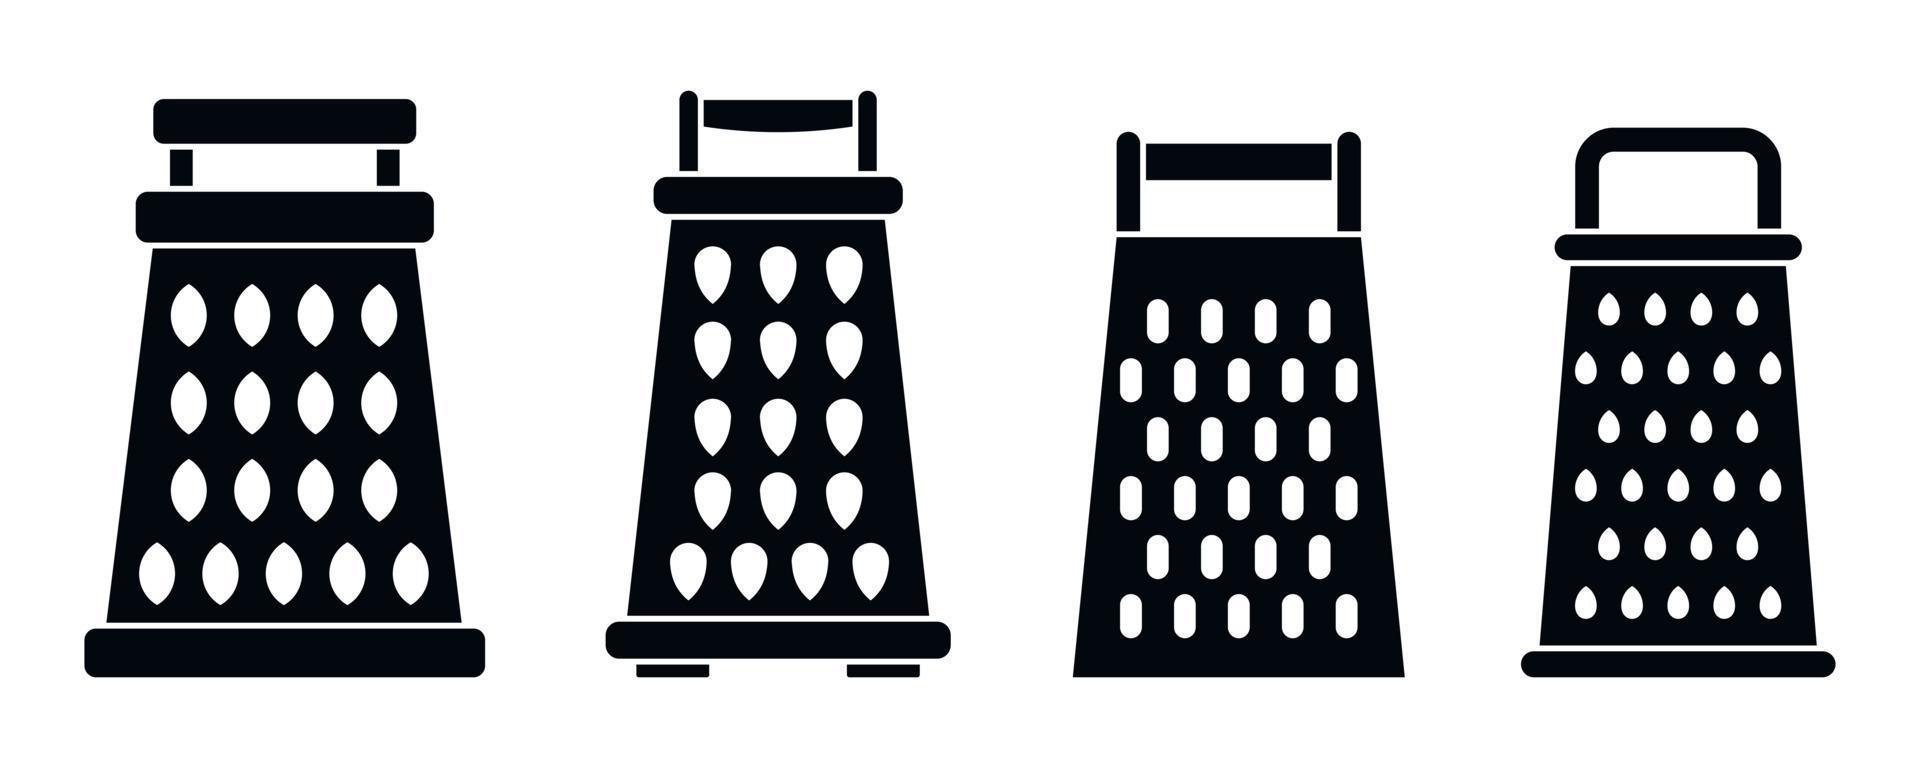 Cook grater icons set, simple style vector